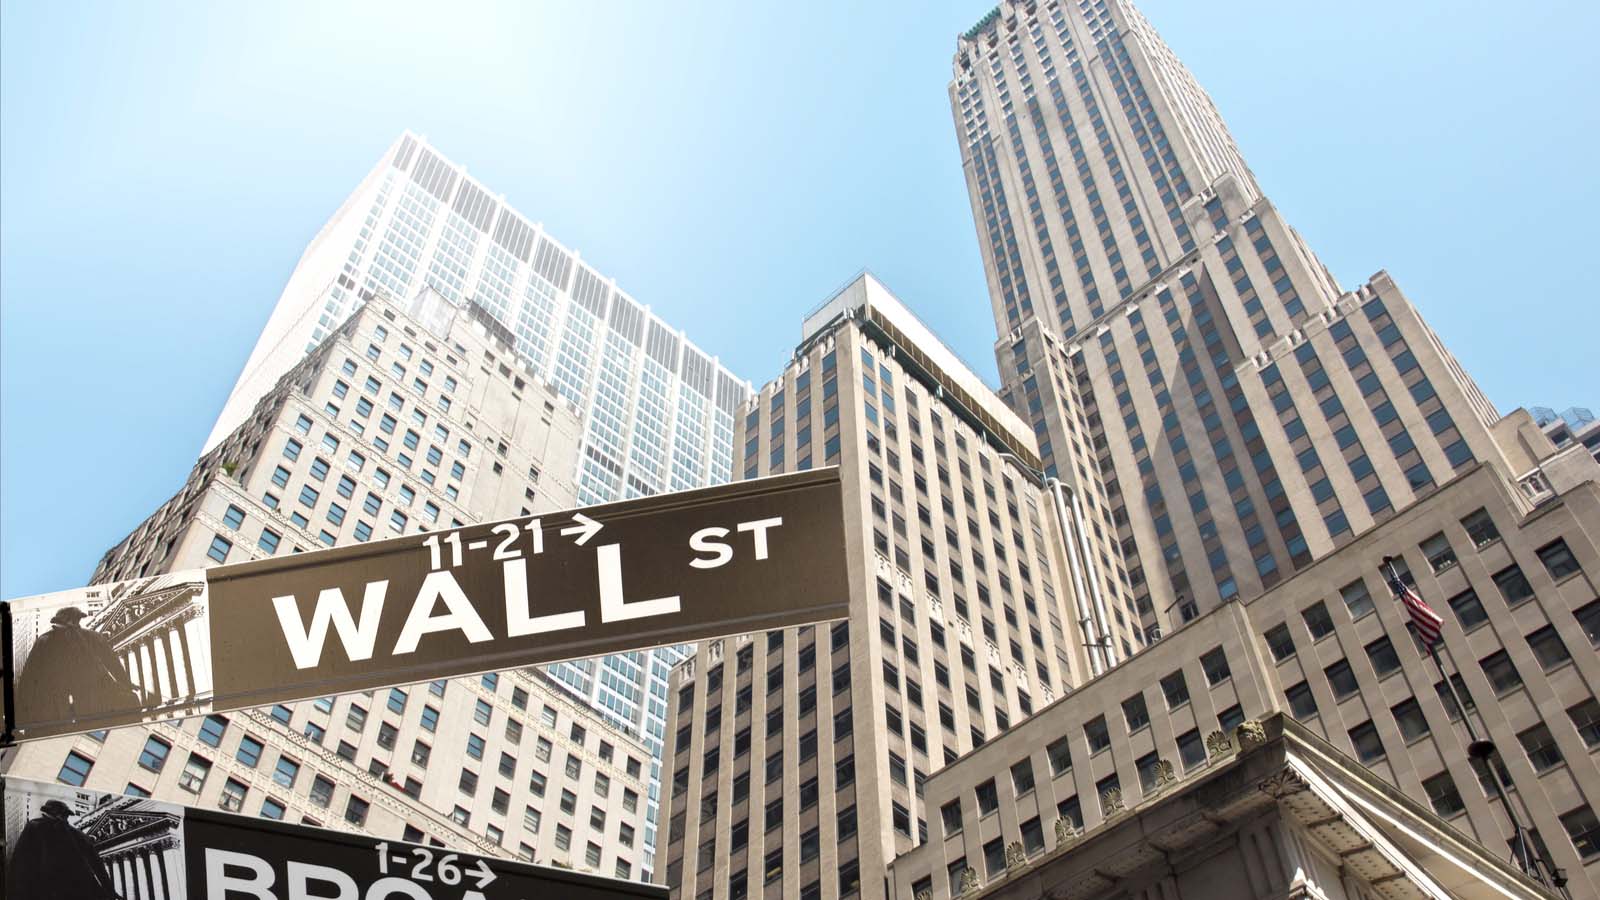 top stocks: skyscraper buildings viewed from the ground with Wall Street street sign in the foreground representing Pre-Market Stock Movers.